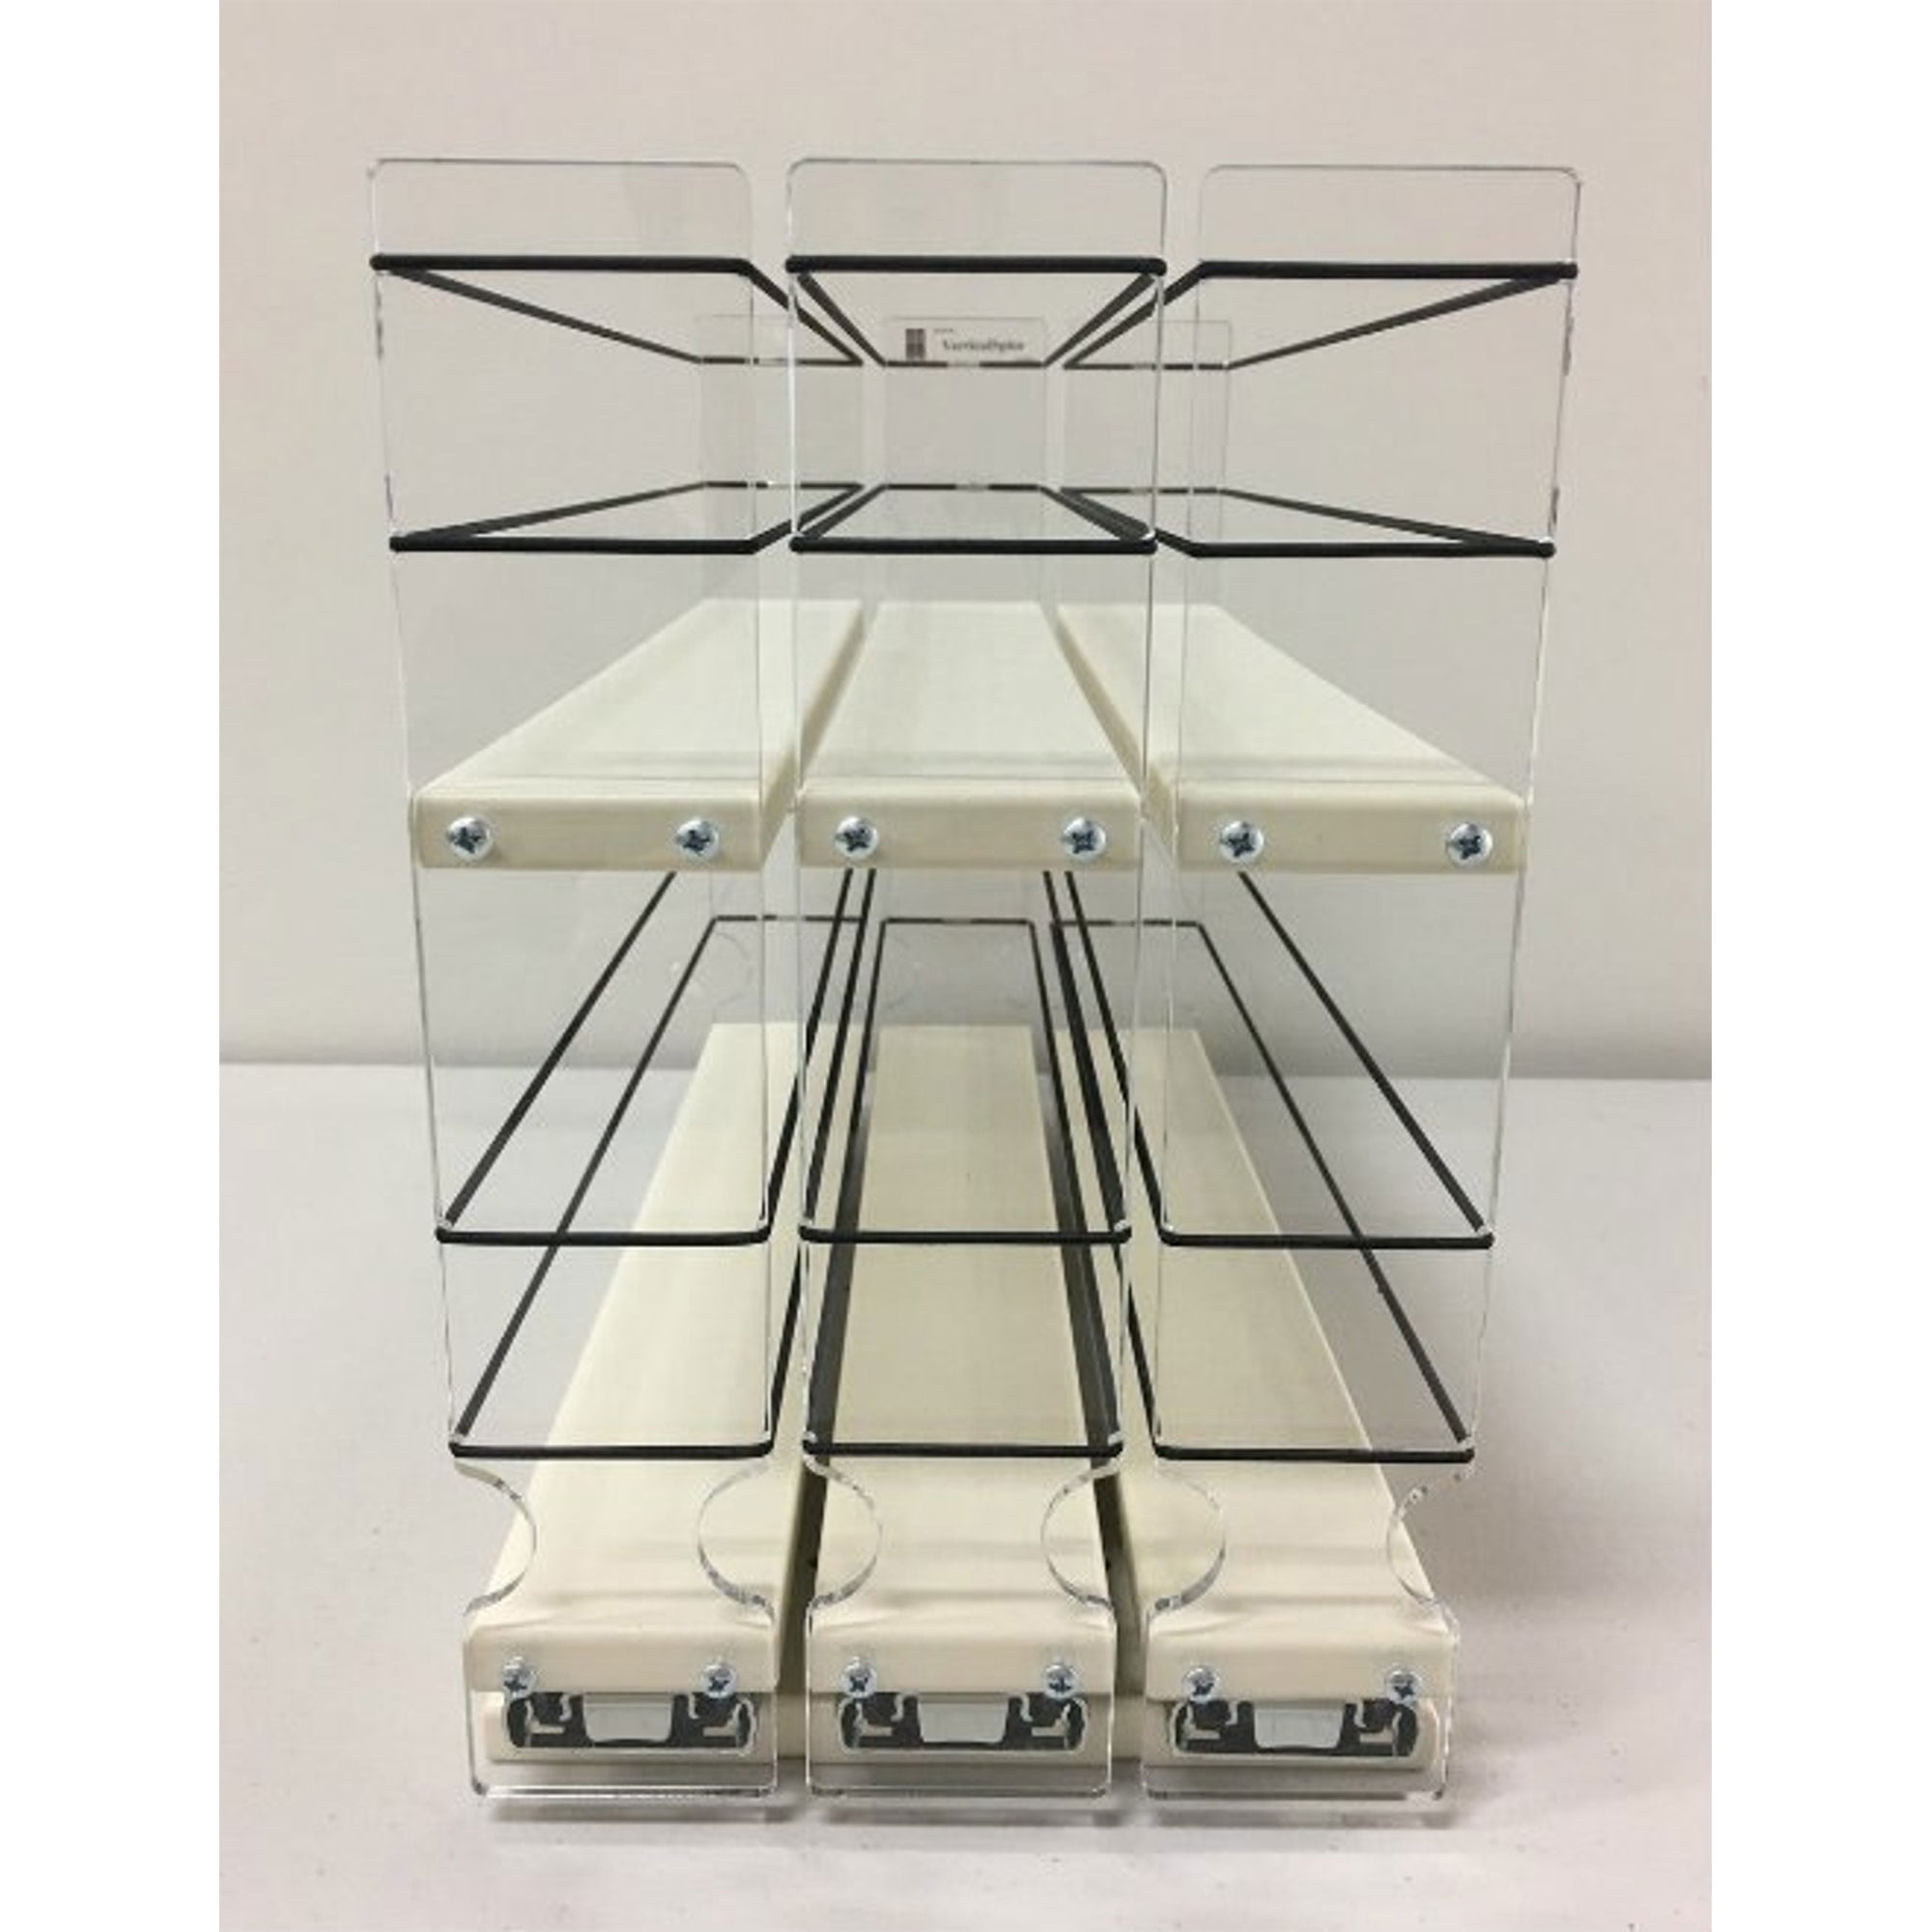 VAEHOLD Acrylic Spice Rack, 5 Tier Clear Spice Rack Organizer for Cabinet, Vertical Spice Rack Kitchen Organizer Shelf for Countertop (5 Tier 12‘’L)